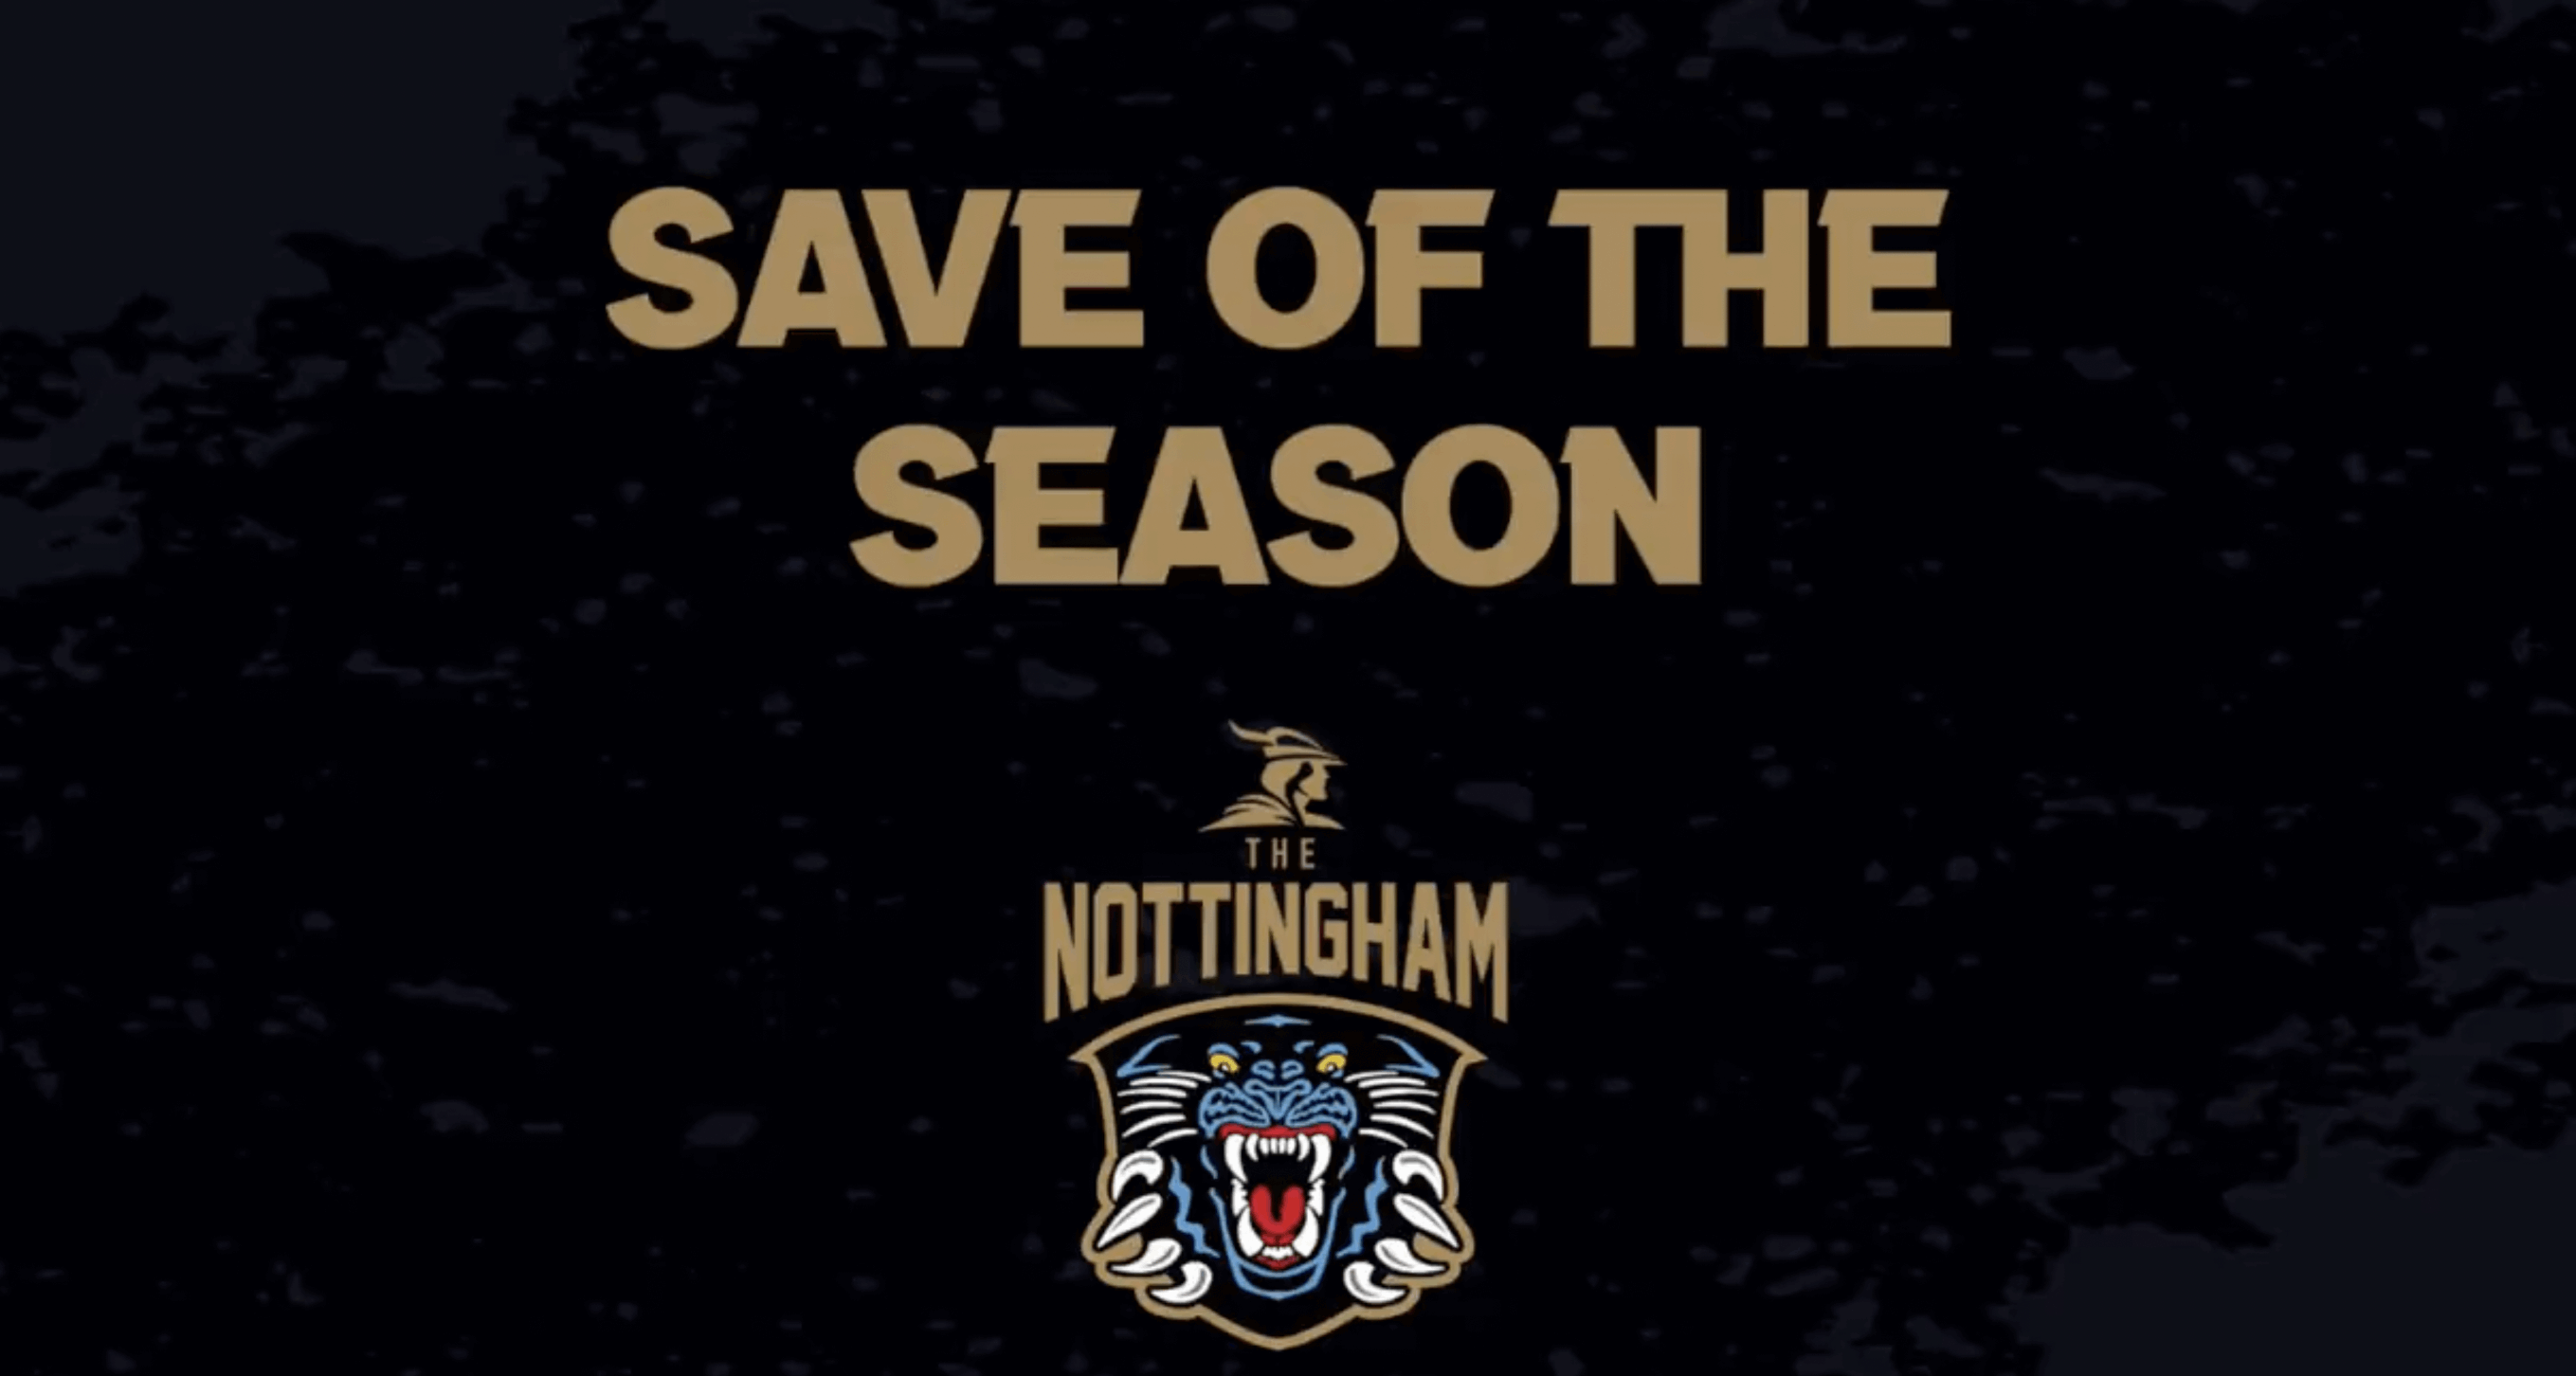 VOTE FOR YOUR 2022-23 SAVE OF THE SEASON Top Image